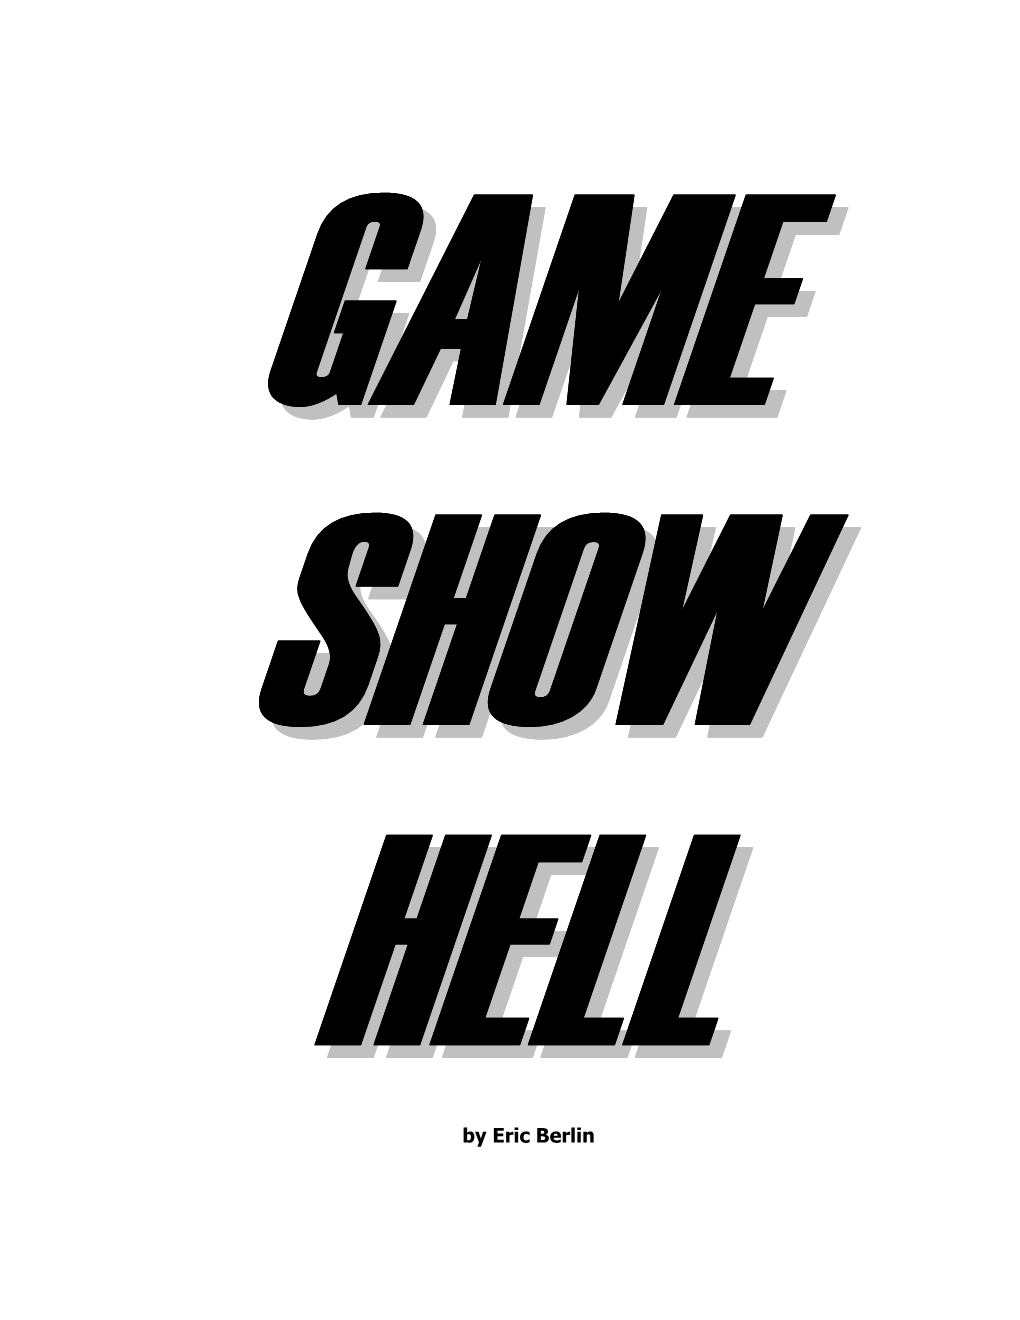 Game Show Hell!”